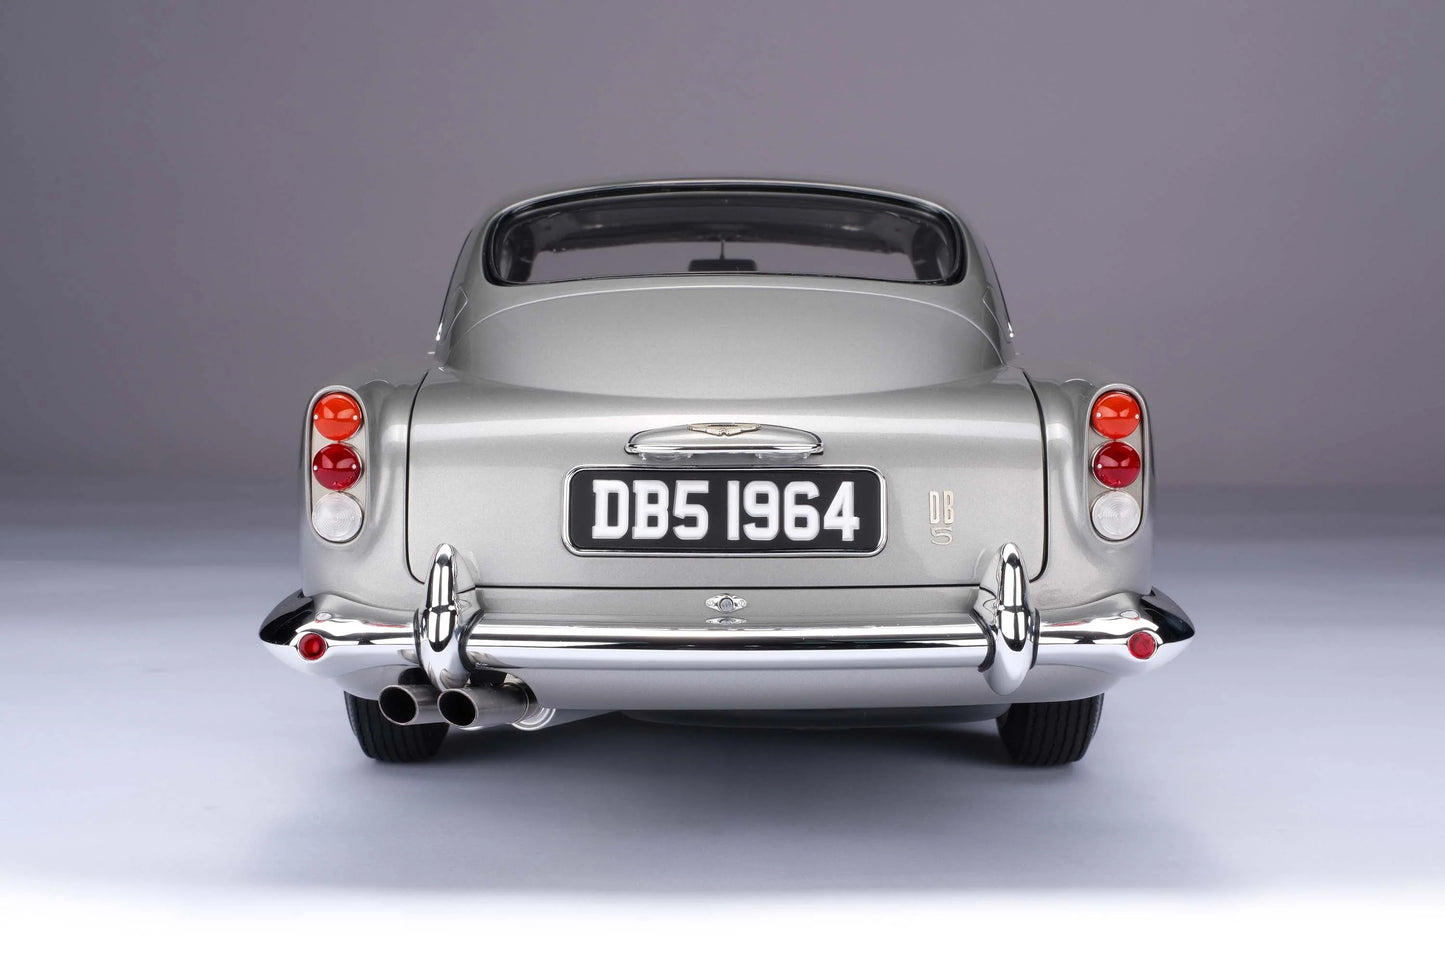 Amalgam Collection Aston Martin DB5 Limited Edition 1:8 Model Car | Exquisite Collector's Piece, Detailed Replica of Iconic Vehicle | 2Jour Concierge, #1 luxury high-end gift & lifestyle shop